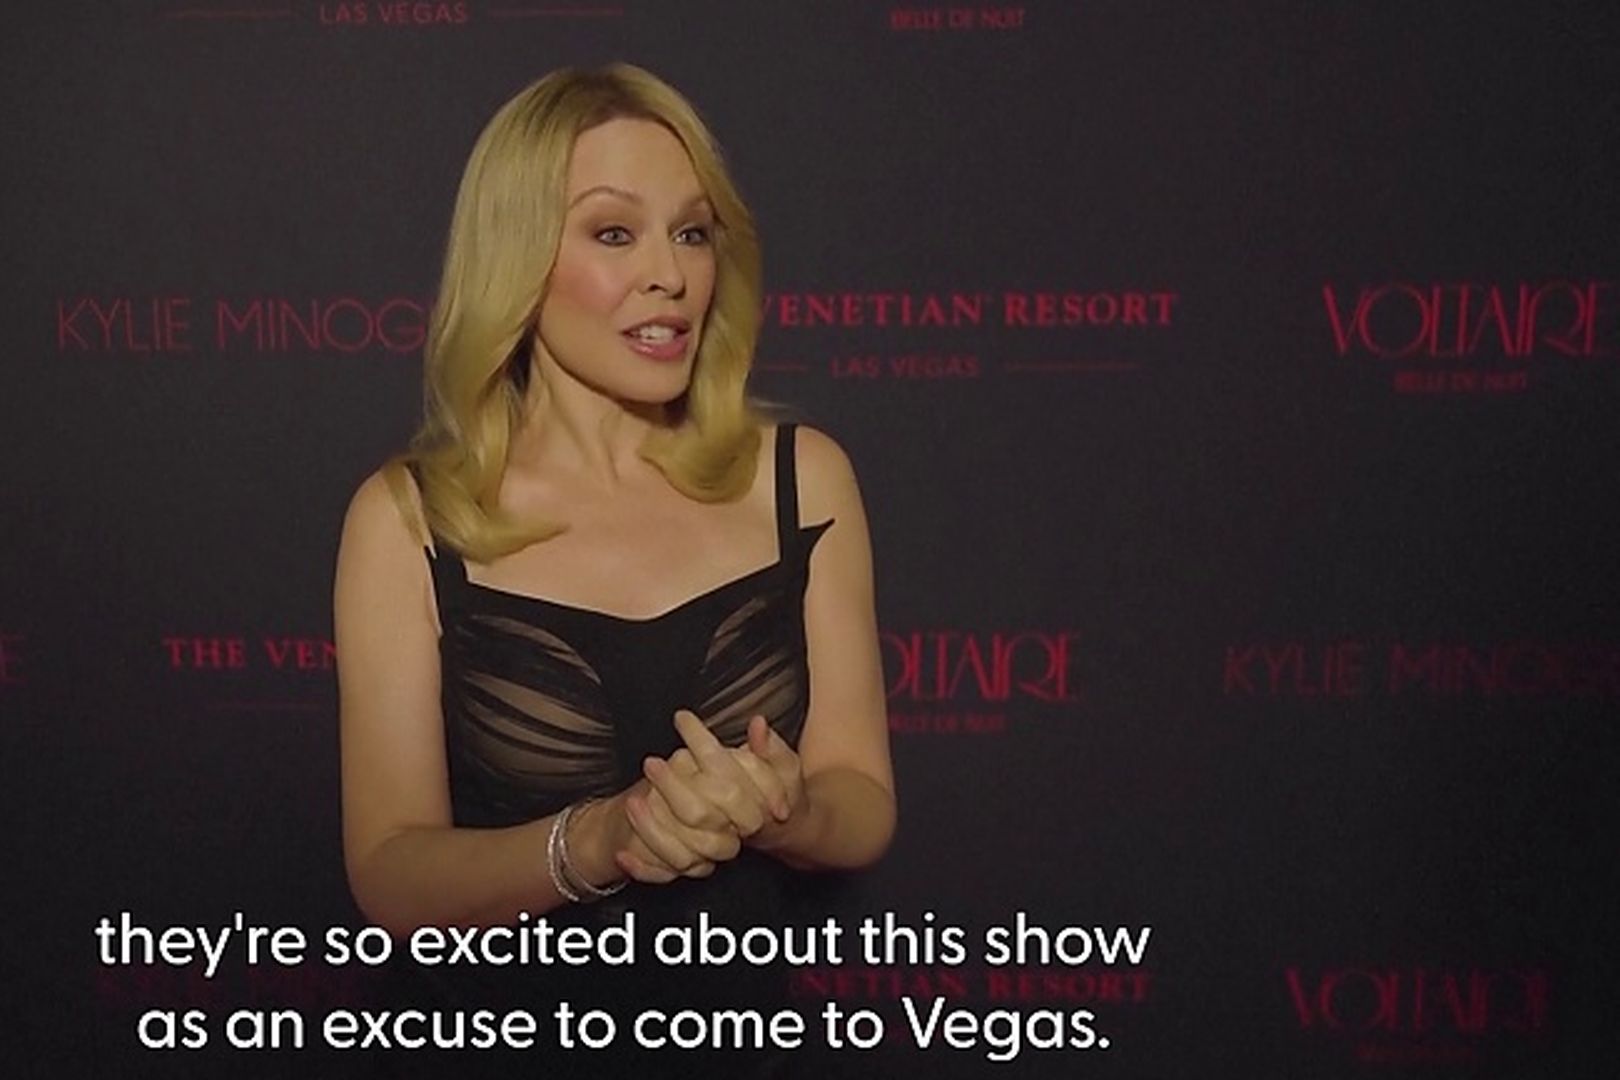 Kylie Minogue to launch Las Vegas residency show in November 